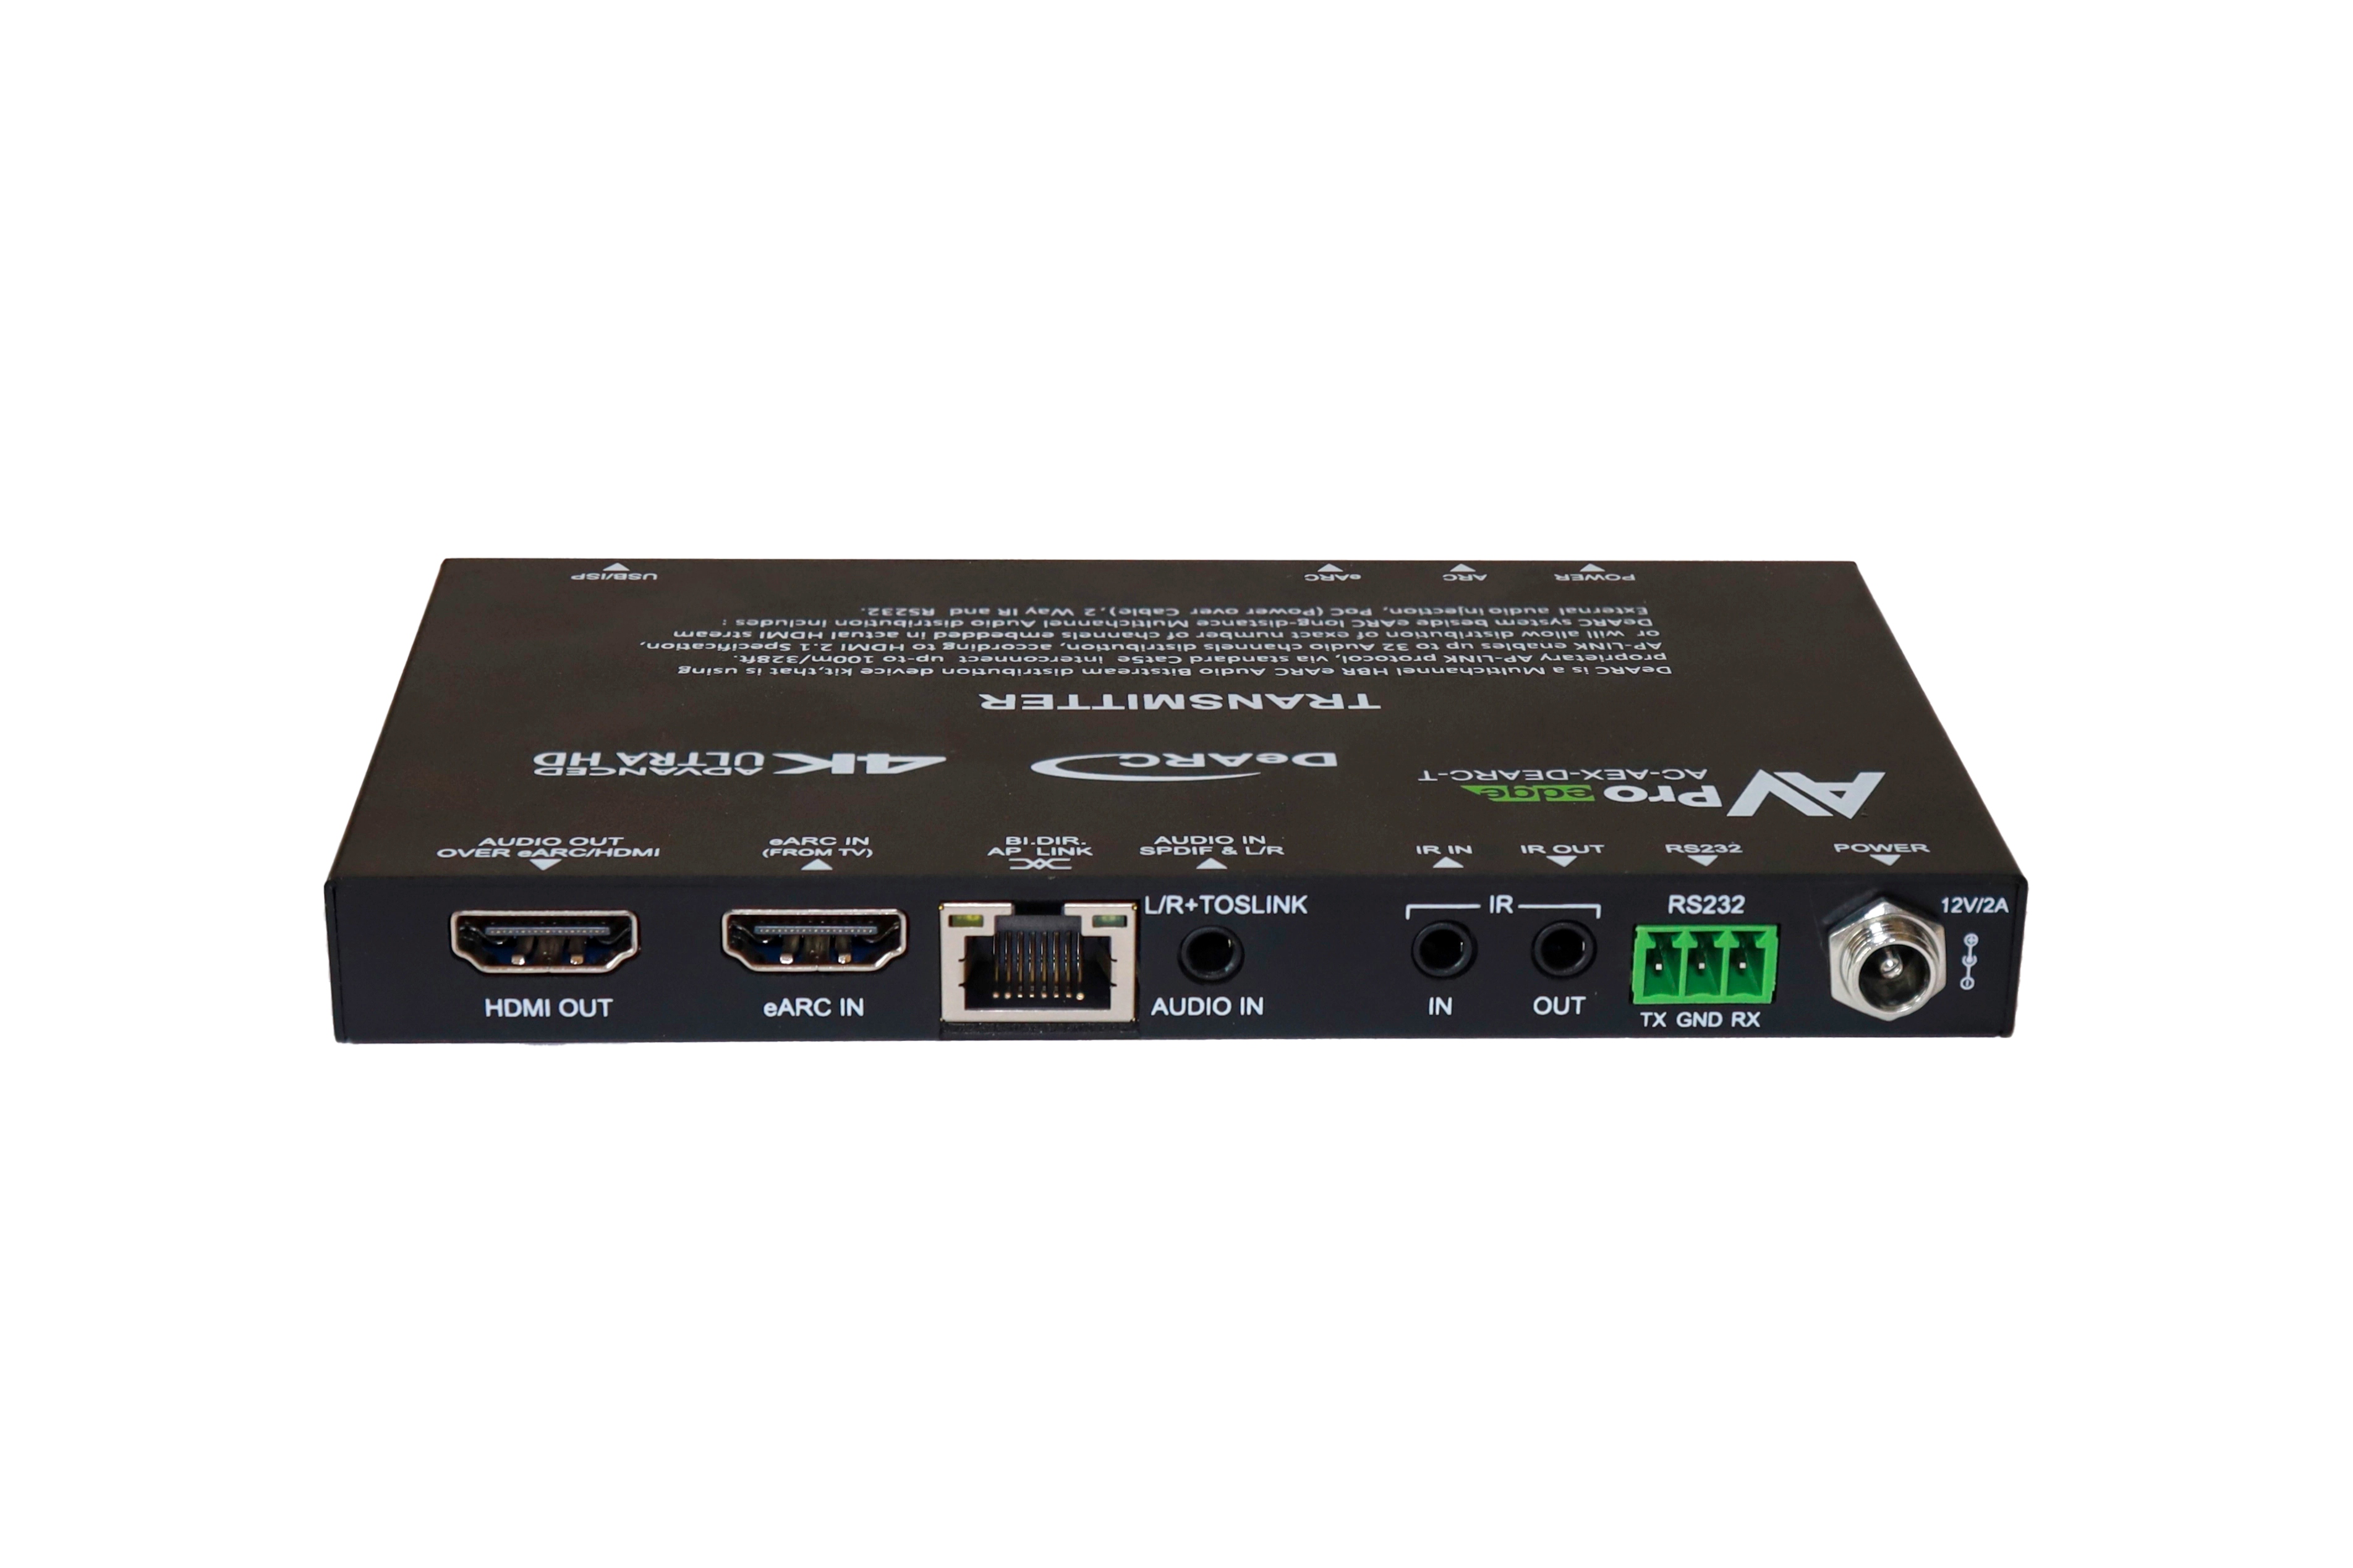 Best 4K eARC HDMI Extender over HDBaseT for Home Theater